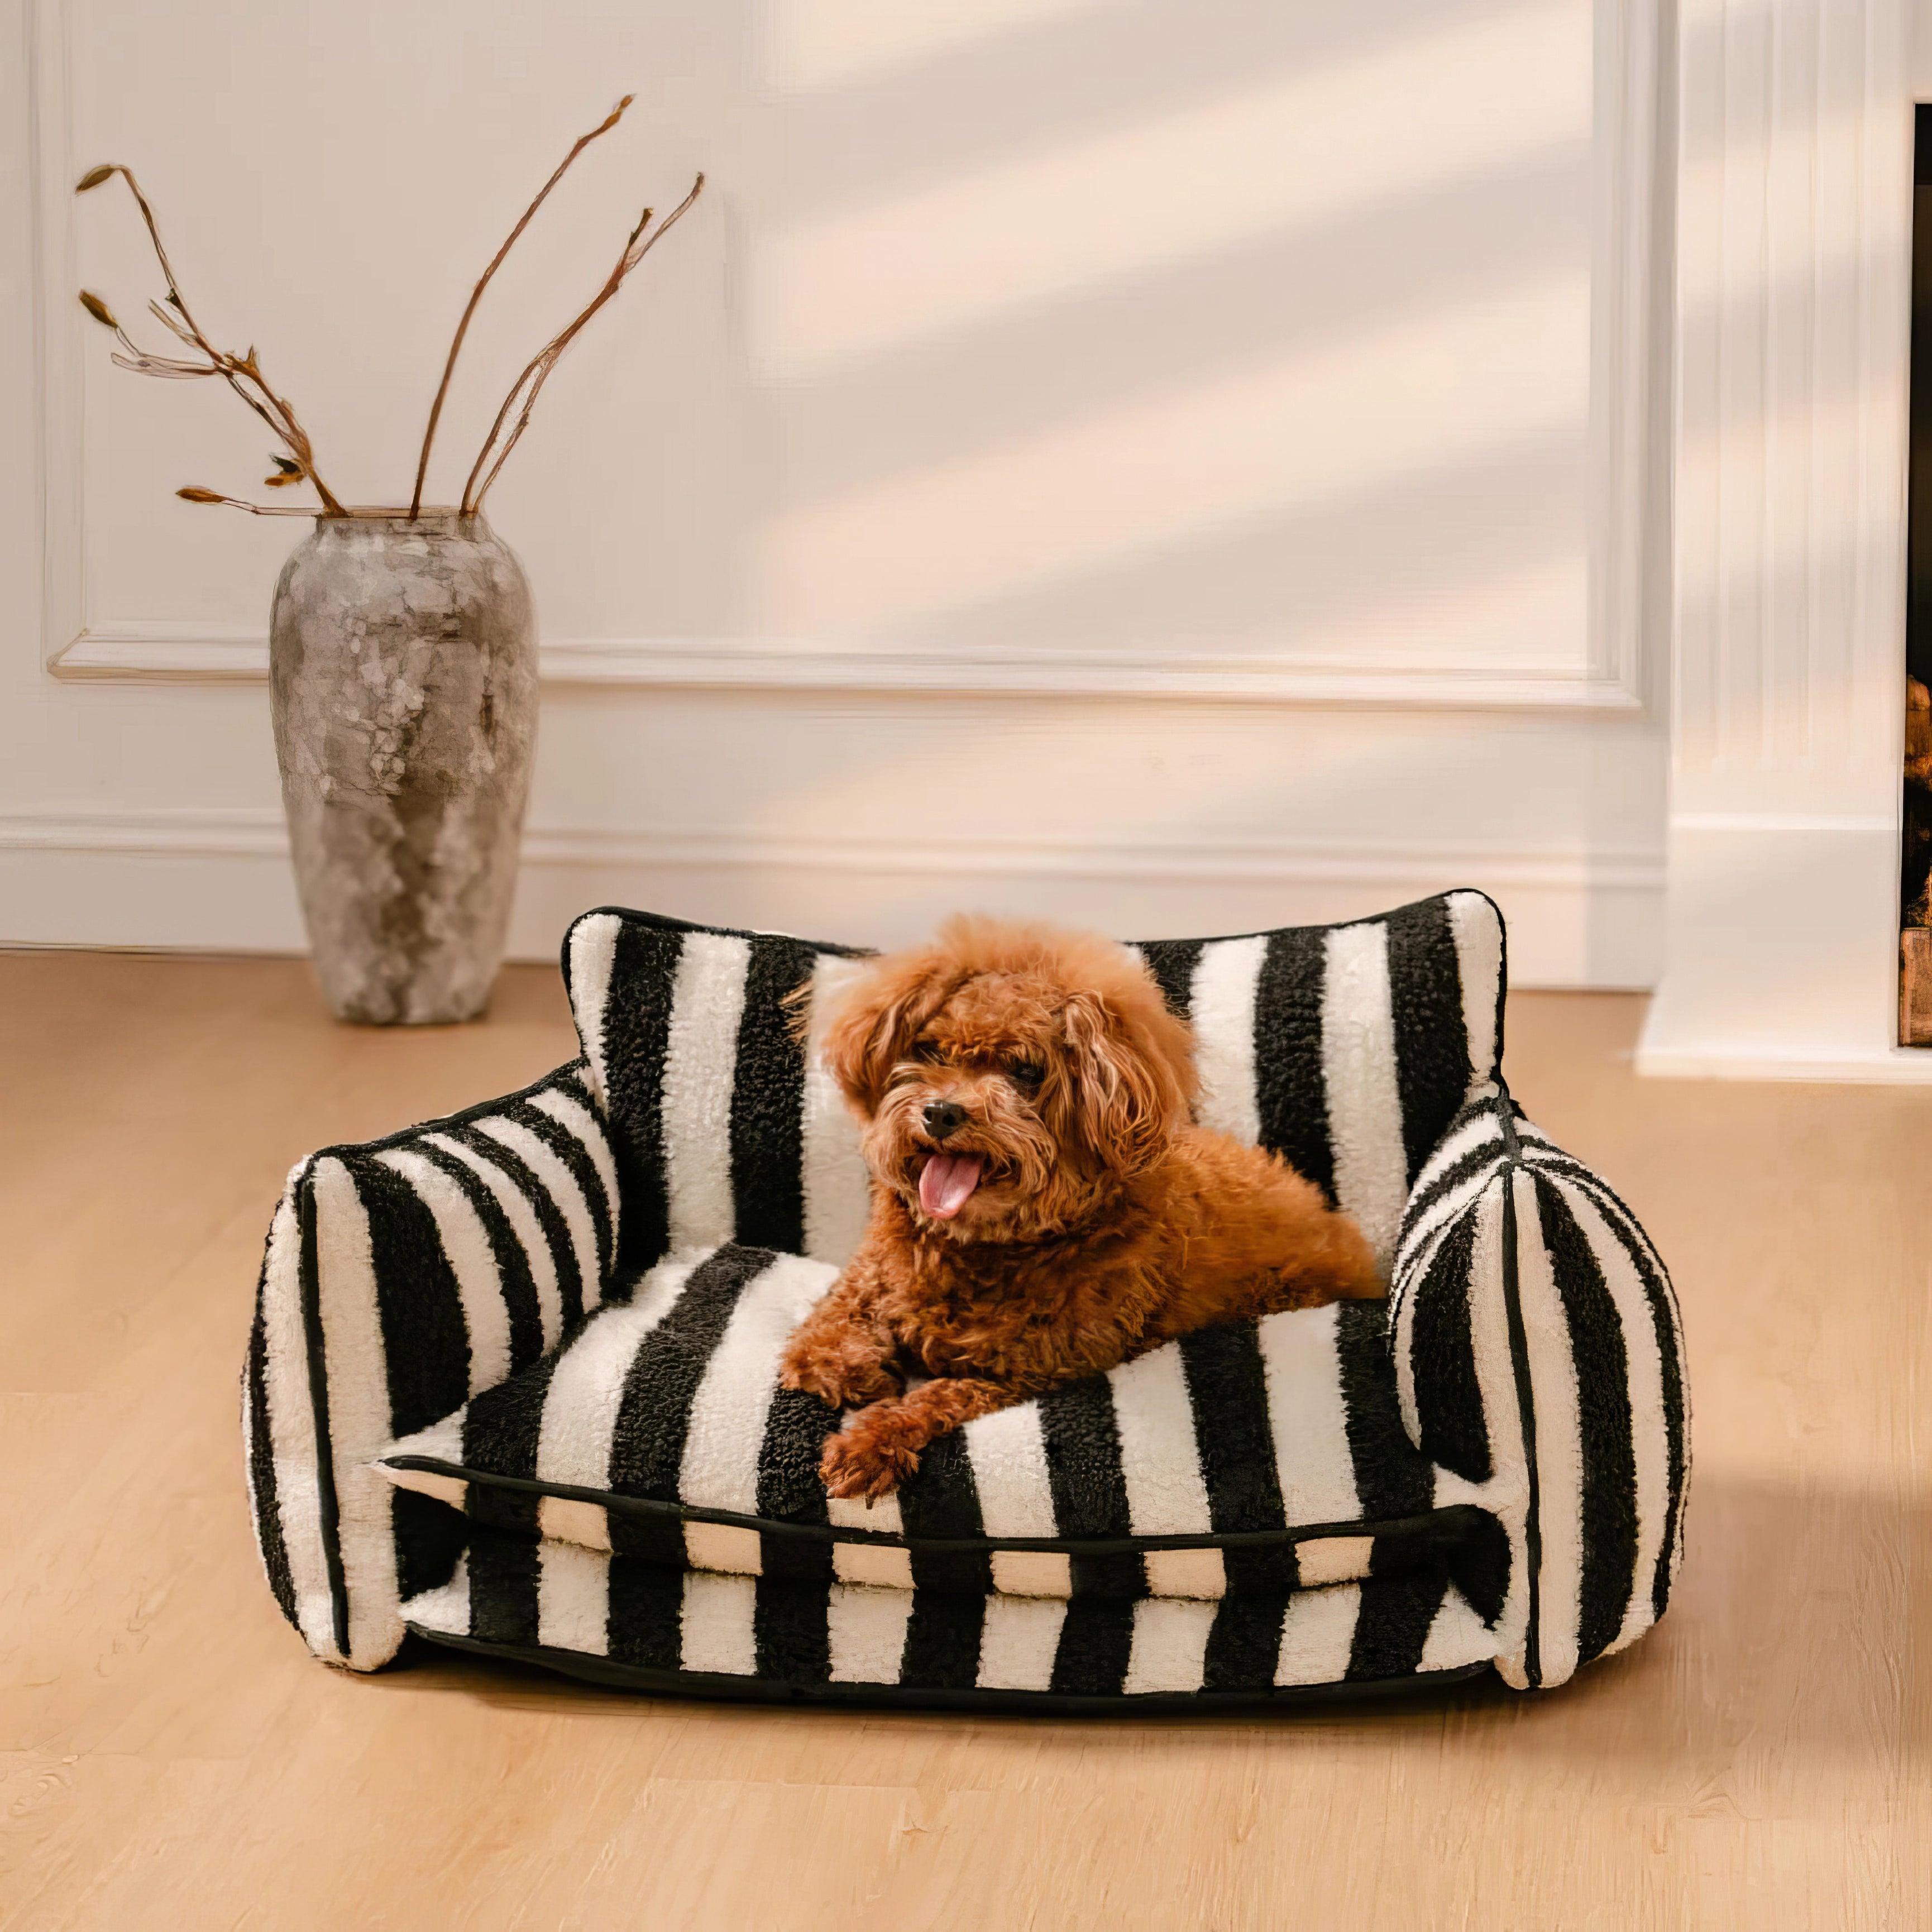 Black and White small sofa bed for dogs